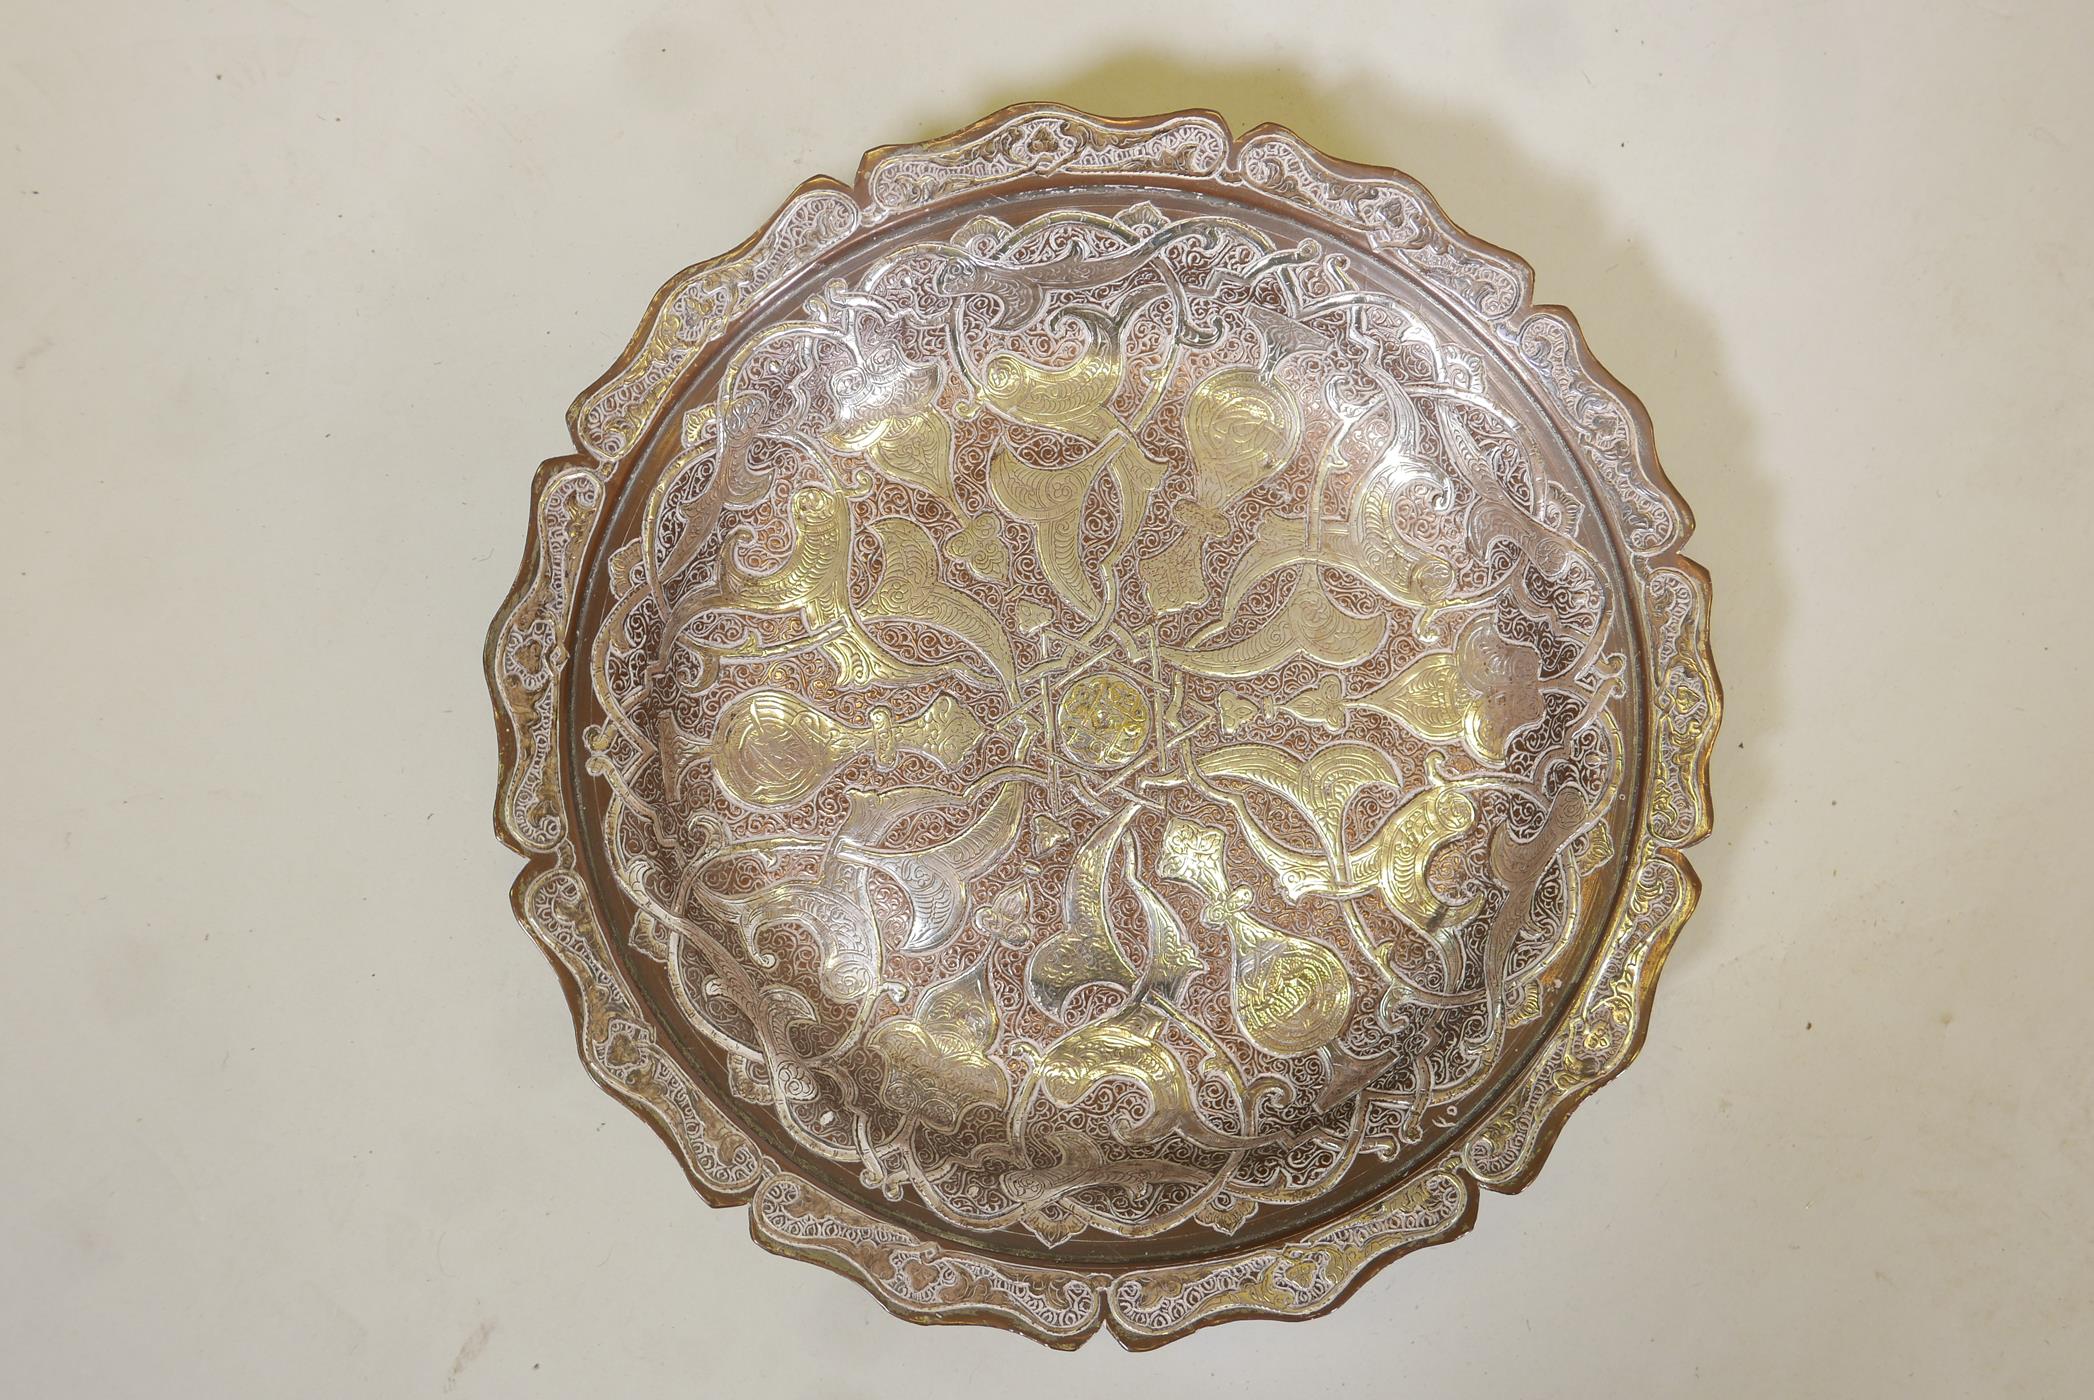 A good Islamic copper bowl, with raised & inlaid silver, engraved with calligraphy, 11" diameter